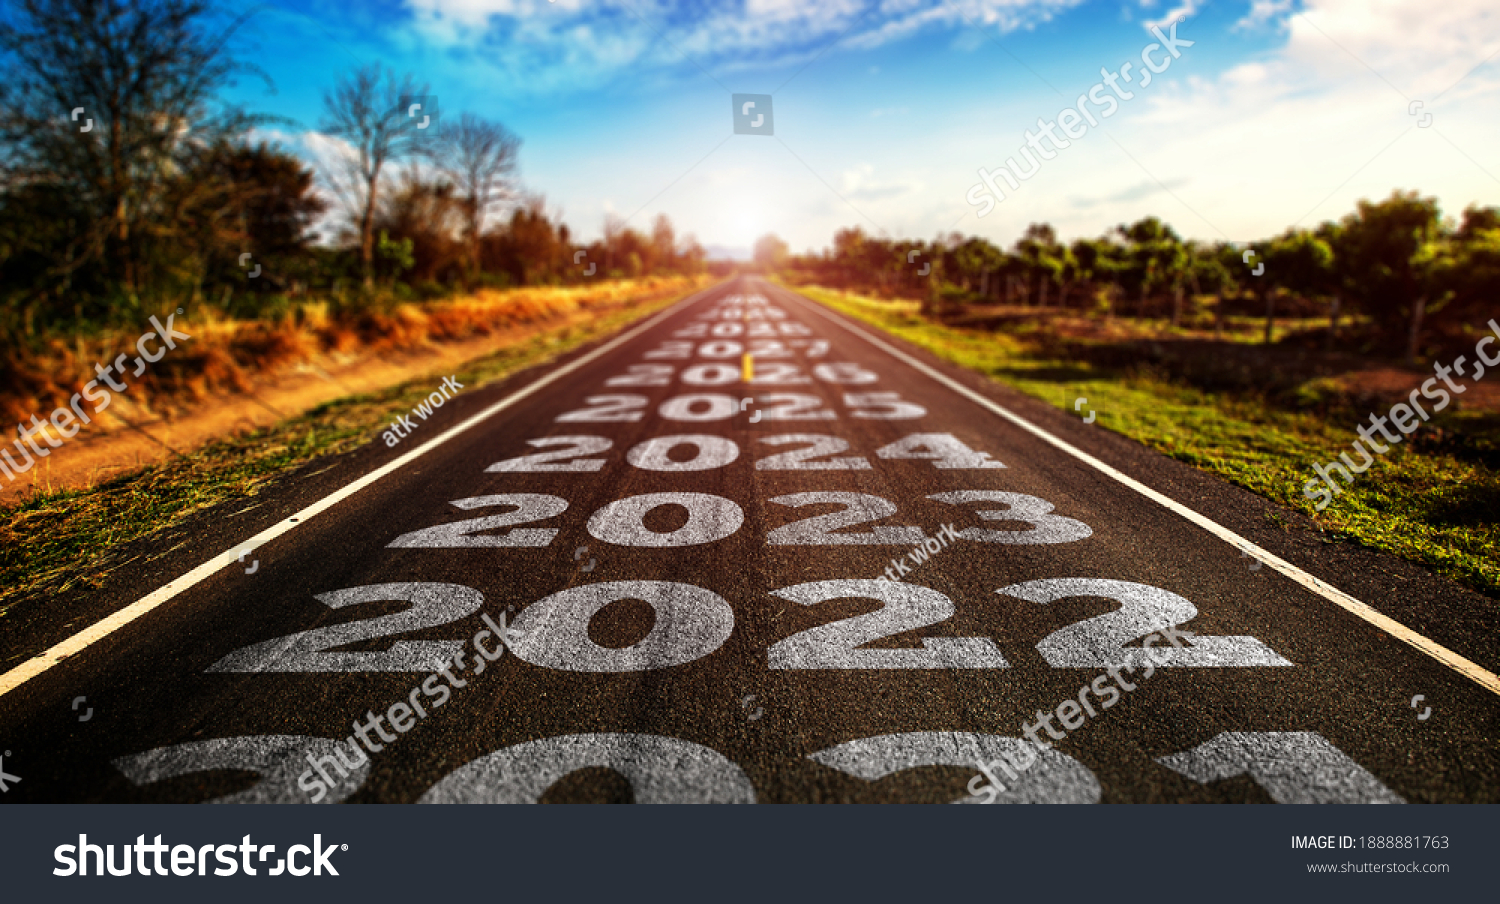 2021-2025 written on highway road in the middle of empty asphalt road and beautiful blue sky. Concept for vision 2021-2025. #1888881763